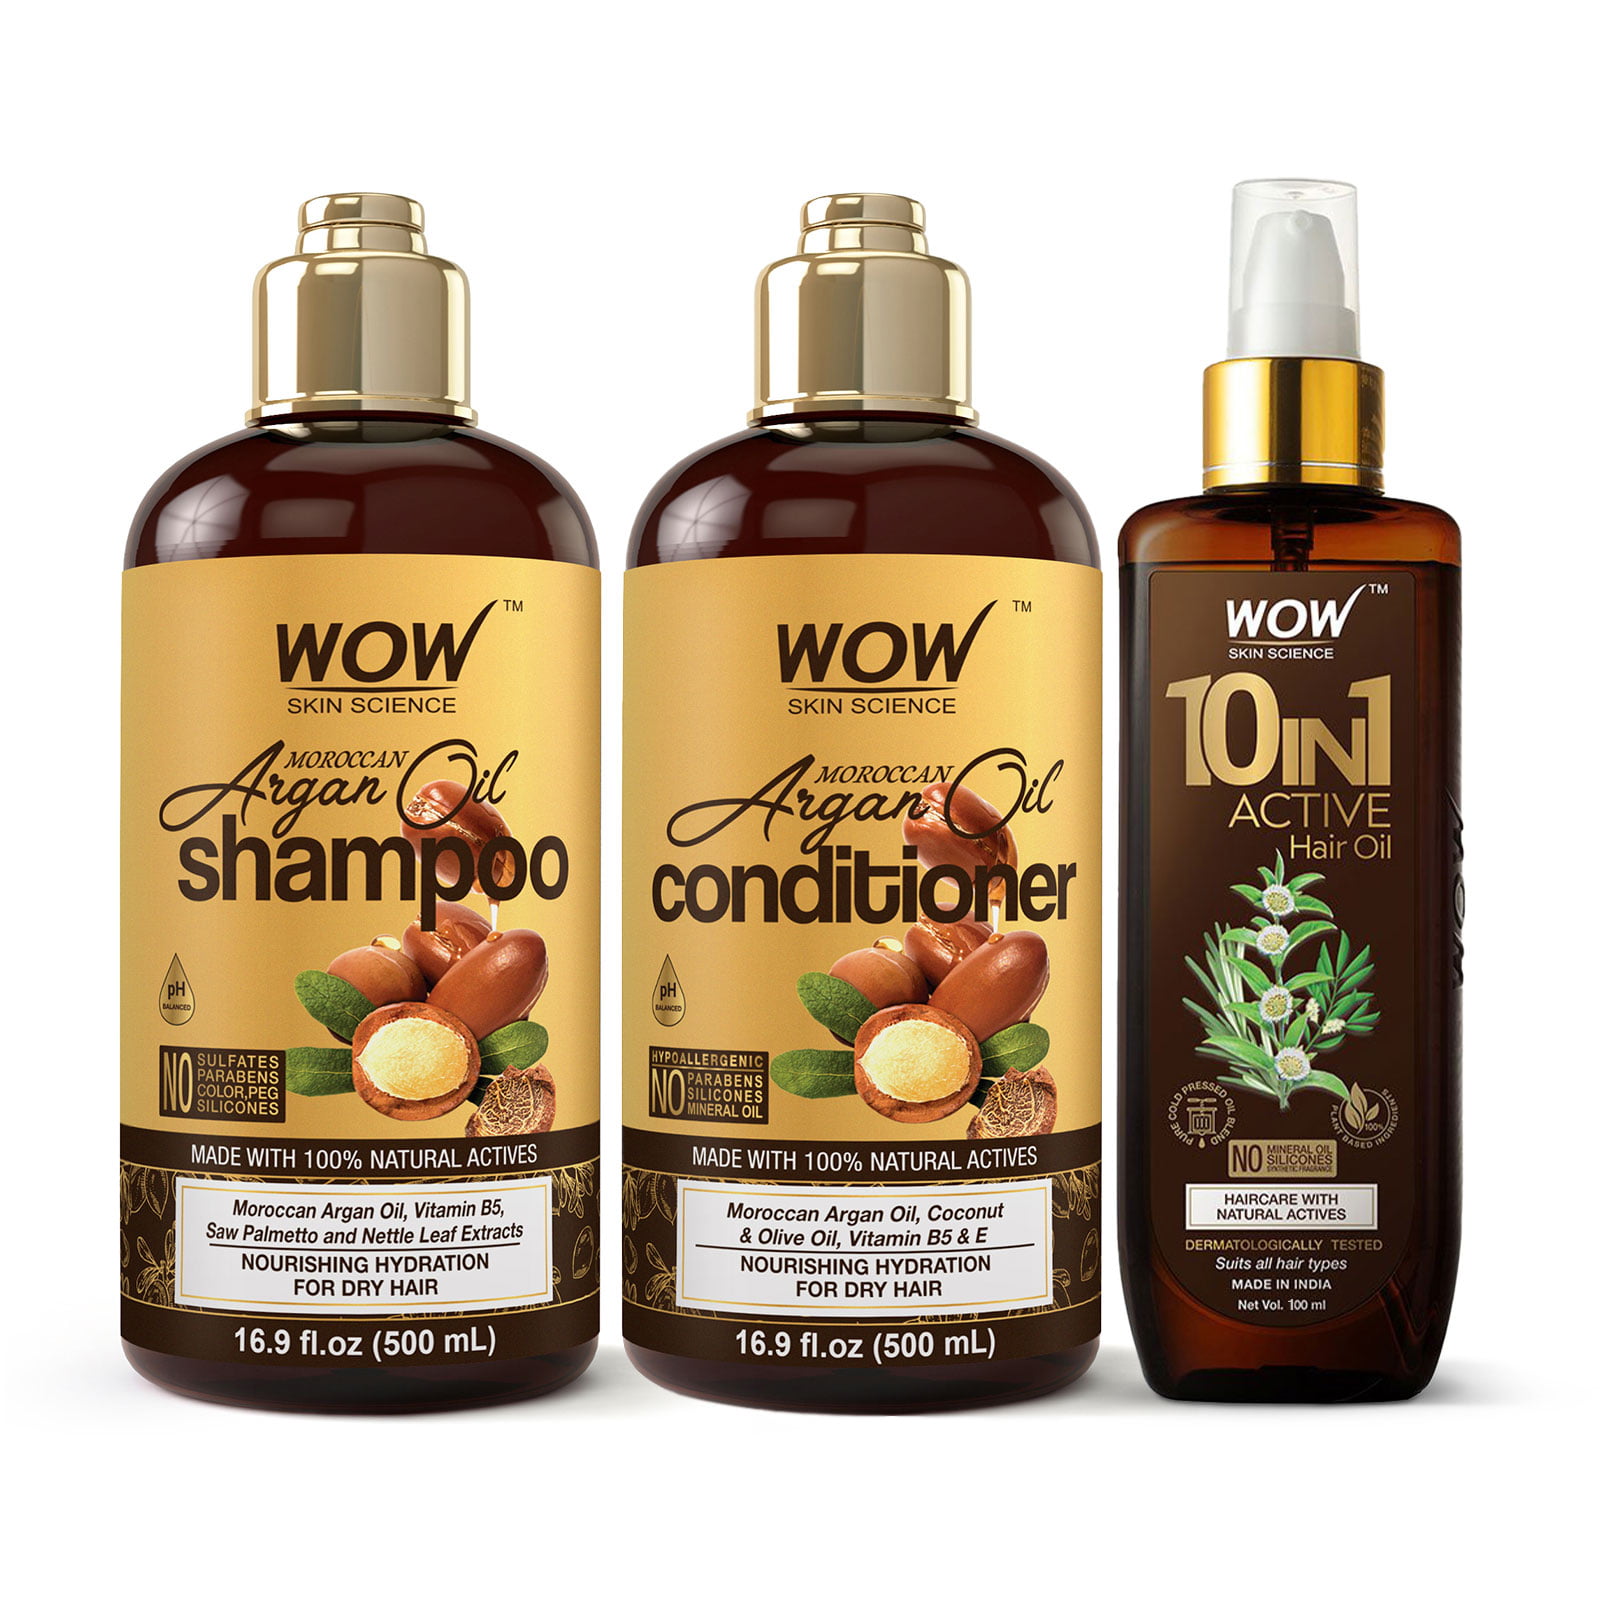 WOW Skin Science Moroccan Argan Oil Shampoo and Conditioner + Hair Oil  Treatment 